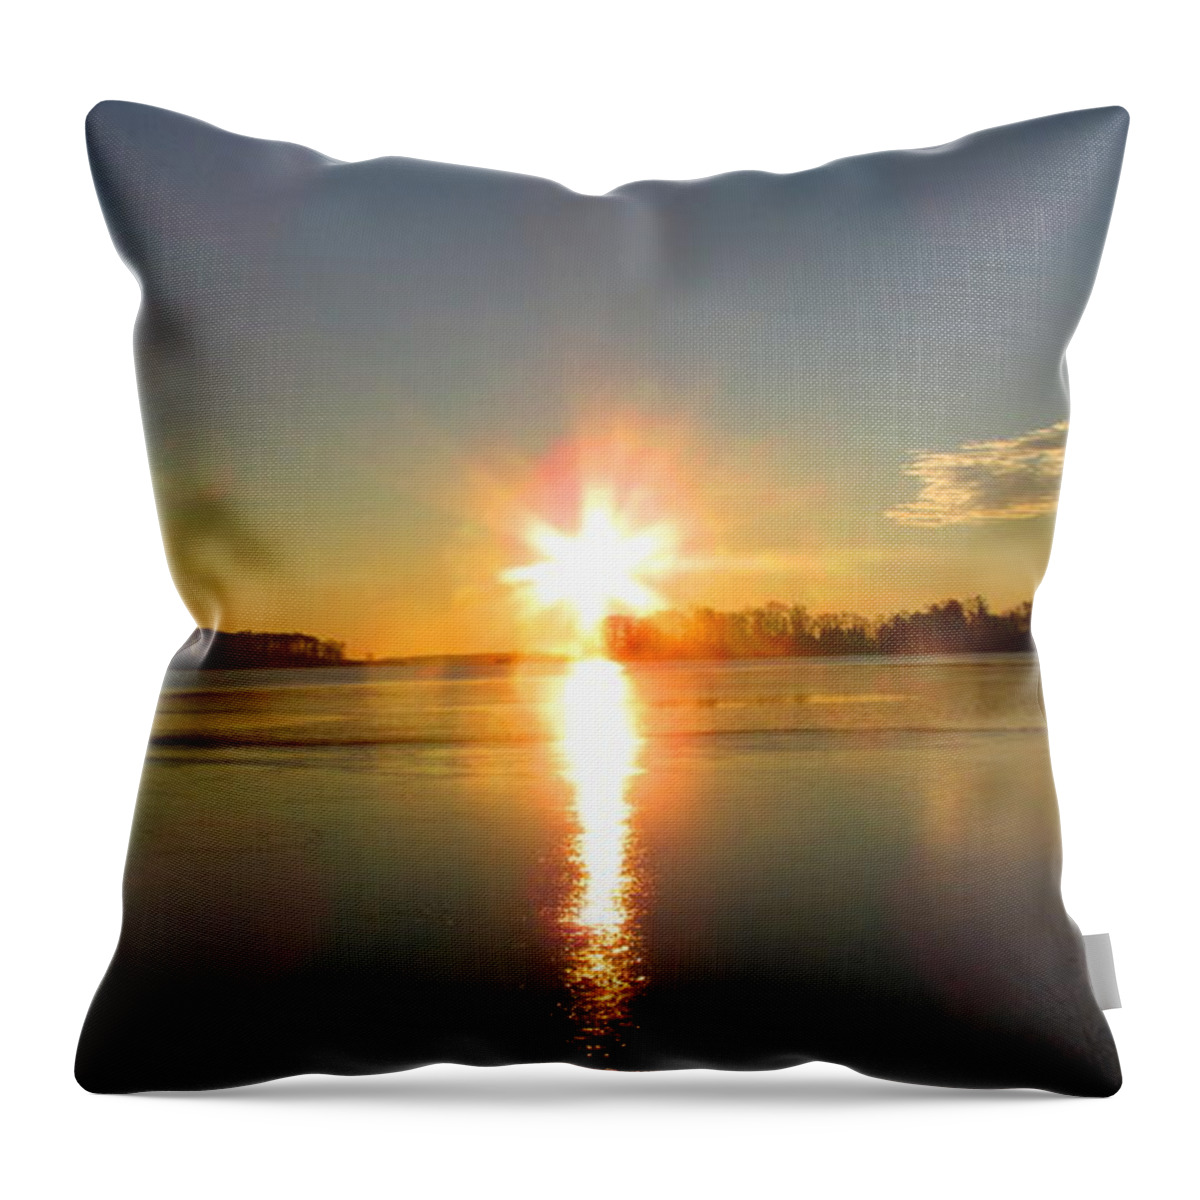 Winter River Sunrise Chesapeake Bay Sunrise Morning Bayscape Waterscapes Riverscapes Dundee Creek Sunrise December Dawn Natural Landscapes Naturescapes Winterscapes Winter Wetland Marshy Point Sunrise Throw Pillow featuring the photograph Winter River Sunrise by Joshua Bales